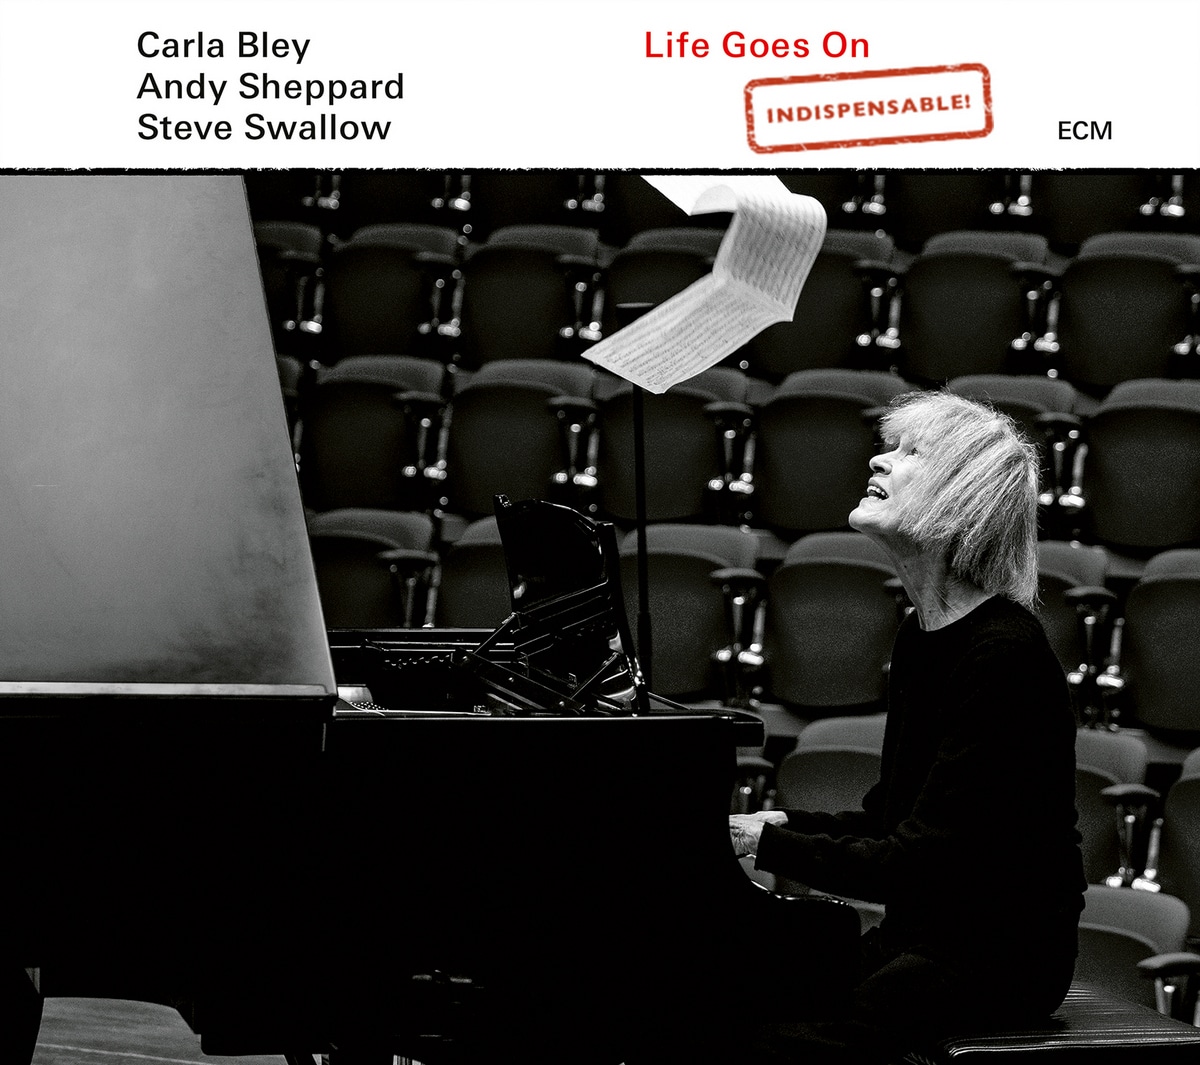 Carla Bley, Andy Sheppard & Steve Swallow - Life goes on